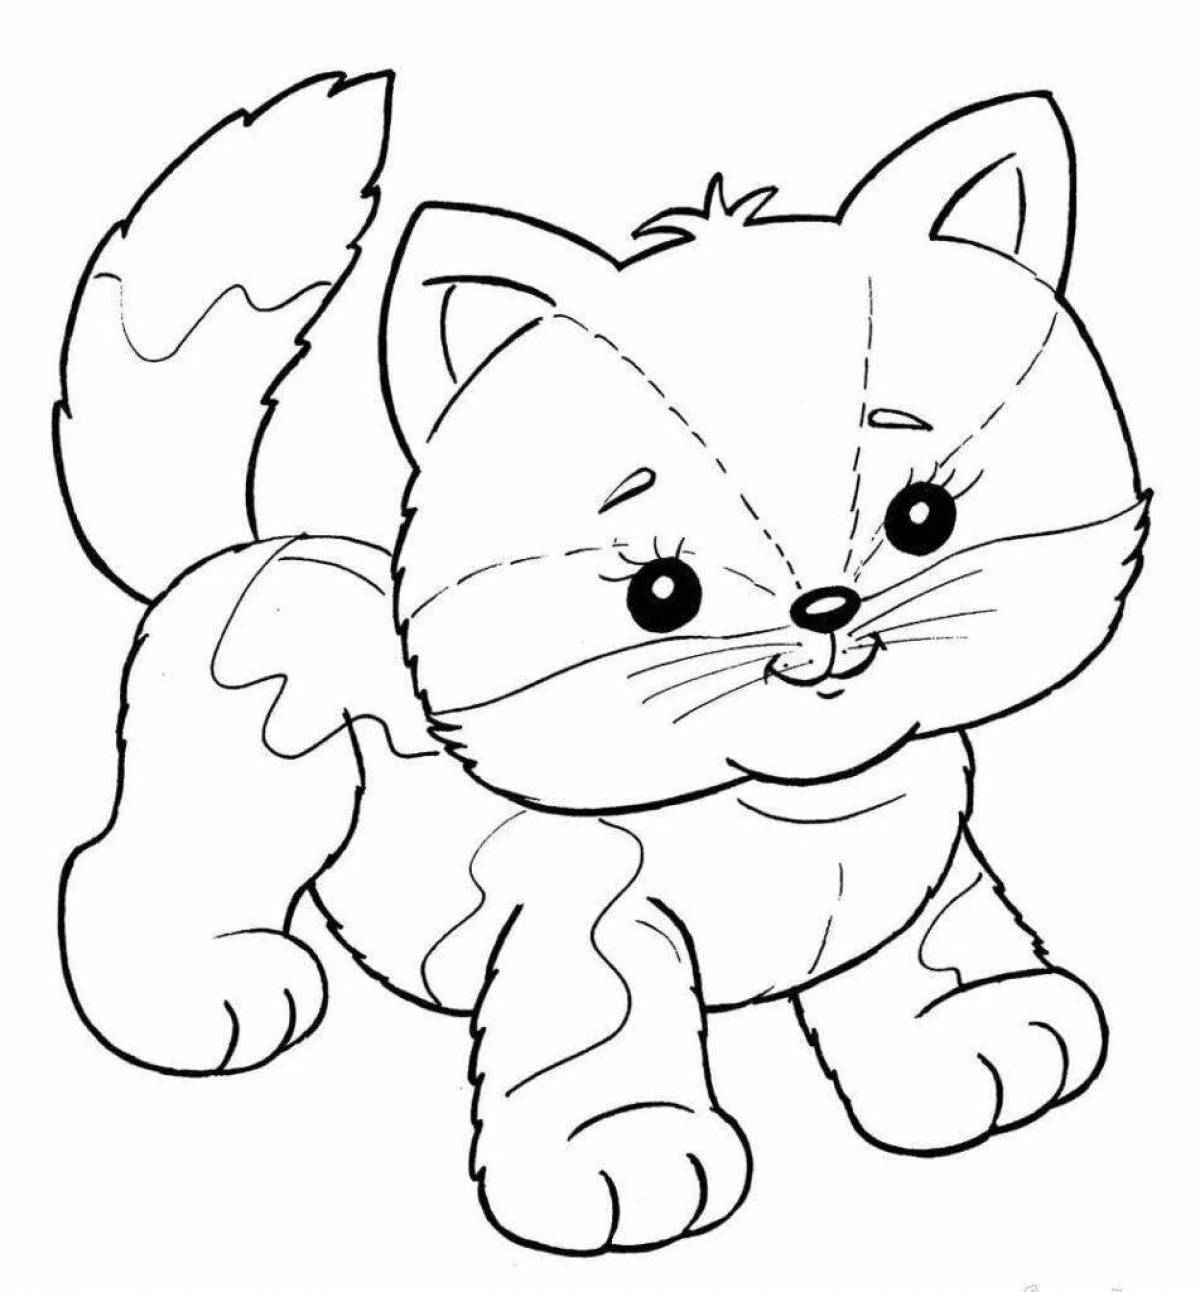 Fun toy for cats coloring book